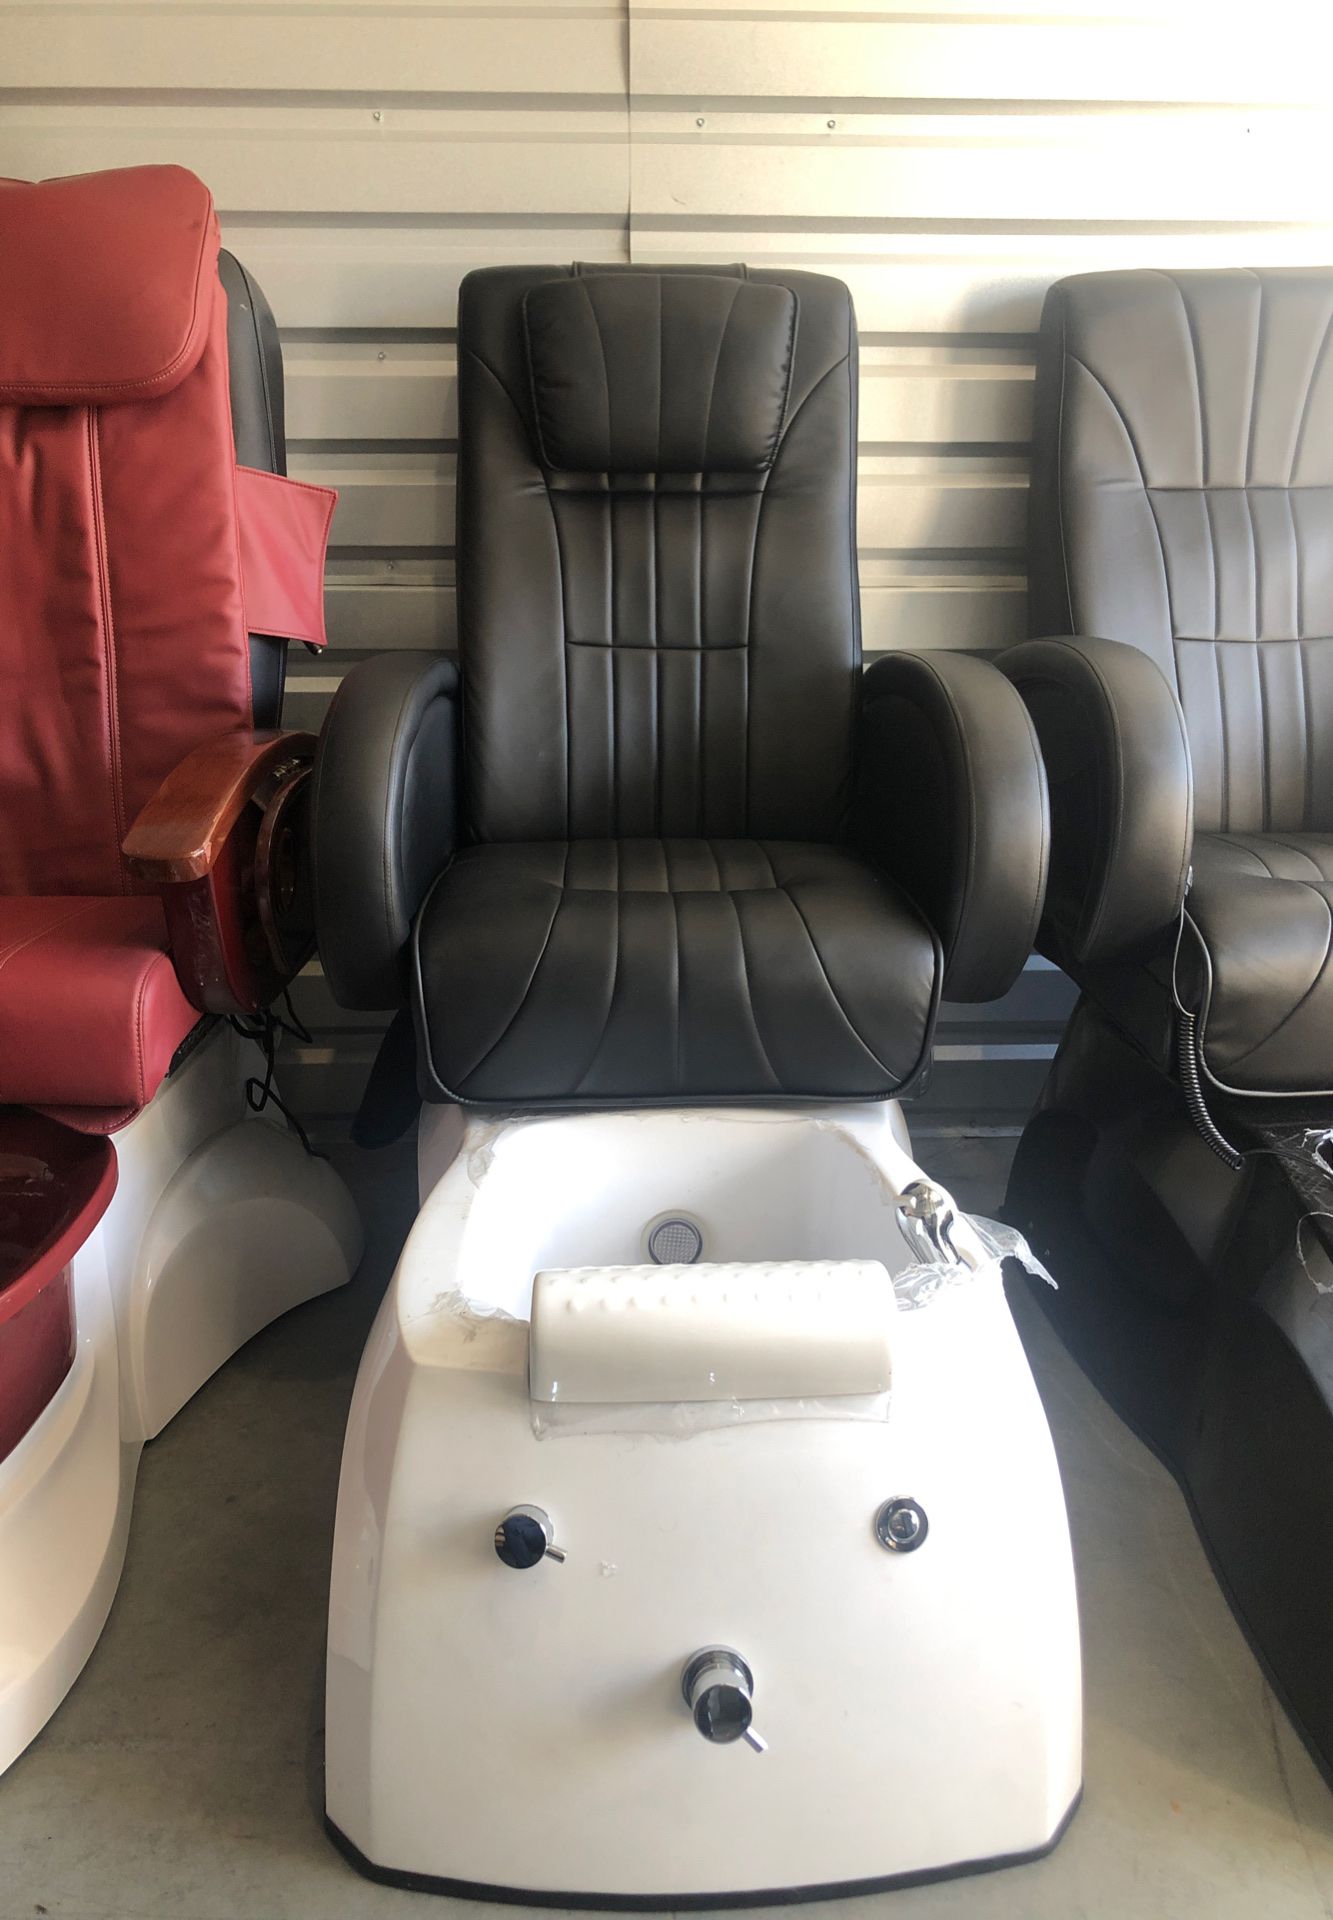 Foot Spa Massage Chairs / Pipeless / Liquidating Sale